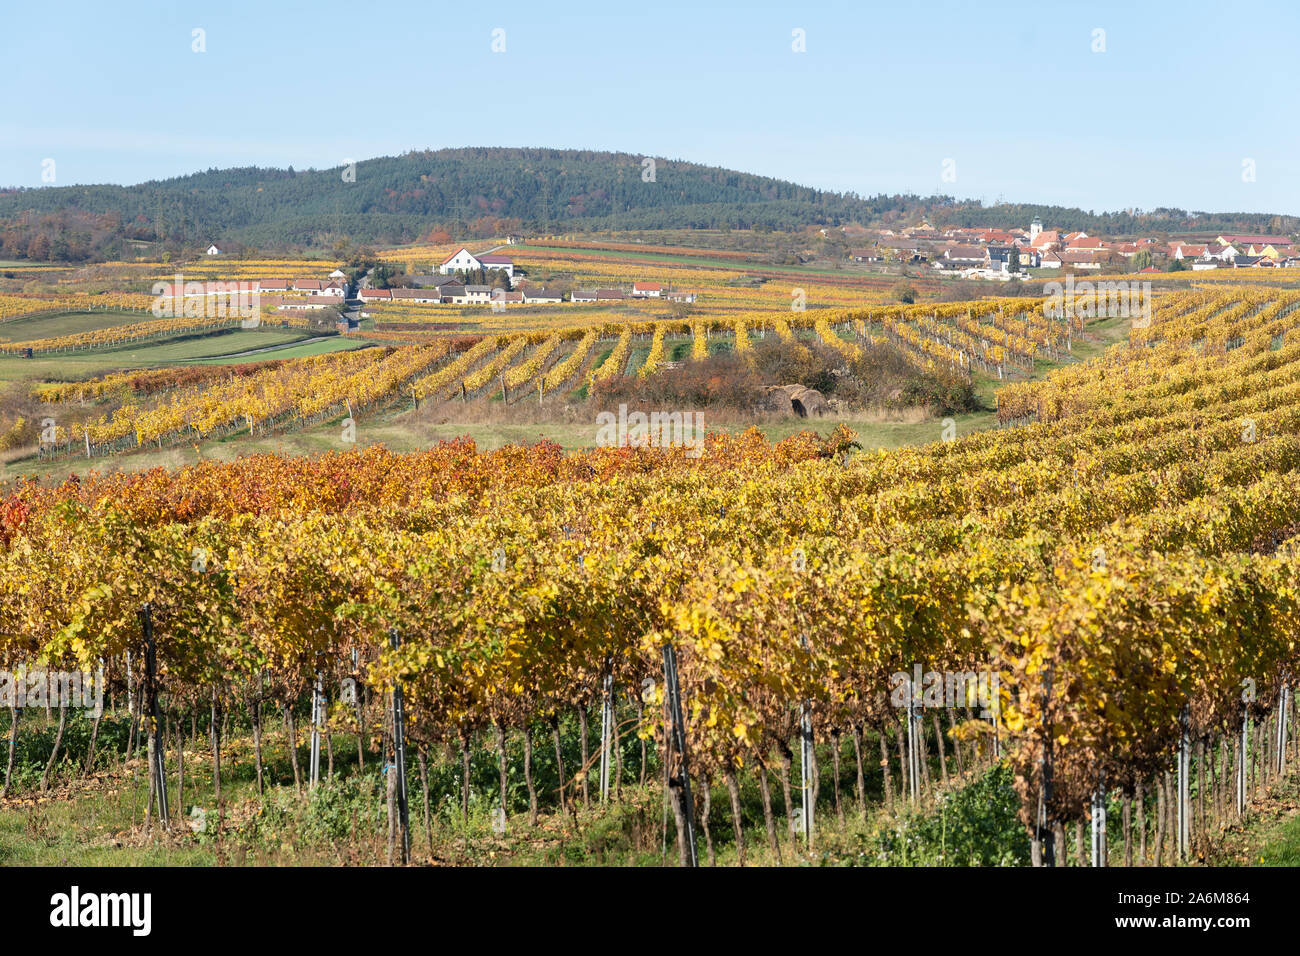 Brightly colored vineyards in Mittelberg in autumn / fall - a typical wine growing village in the Kamptal area of Lower Austria Stock Photo